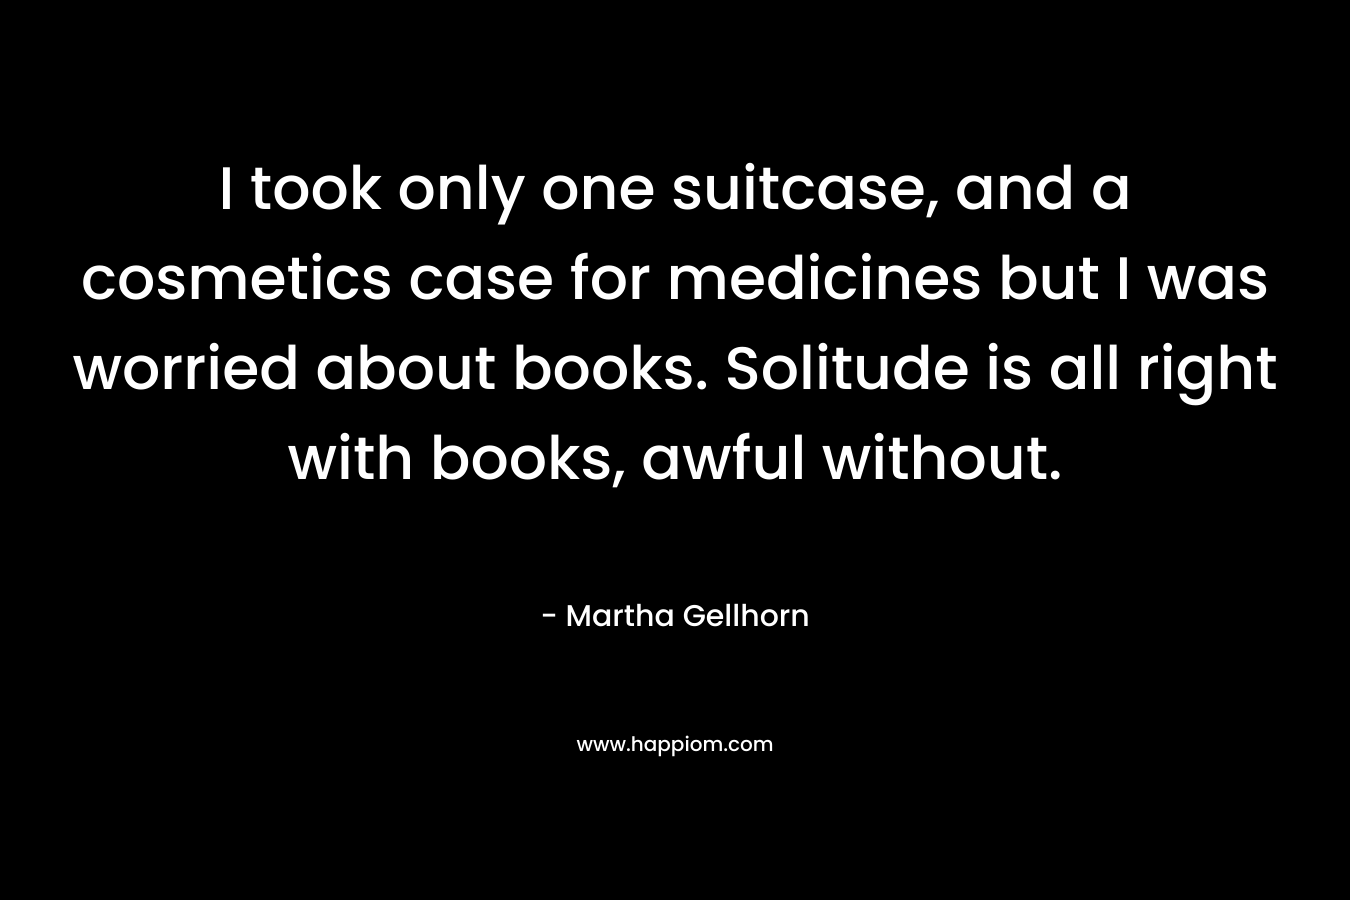 I took only one suitcase, and a cosmetics case for medicines but I was worried about books. Solitude is all right with books, awful without. – Martha Gellhorn